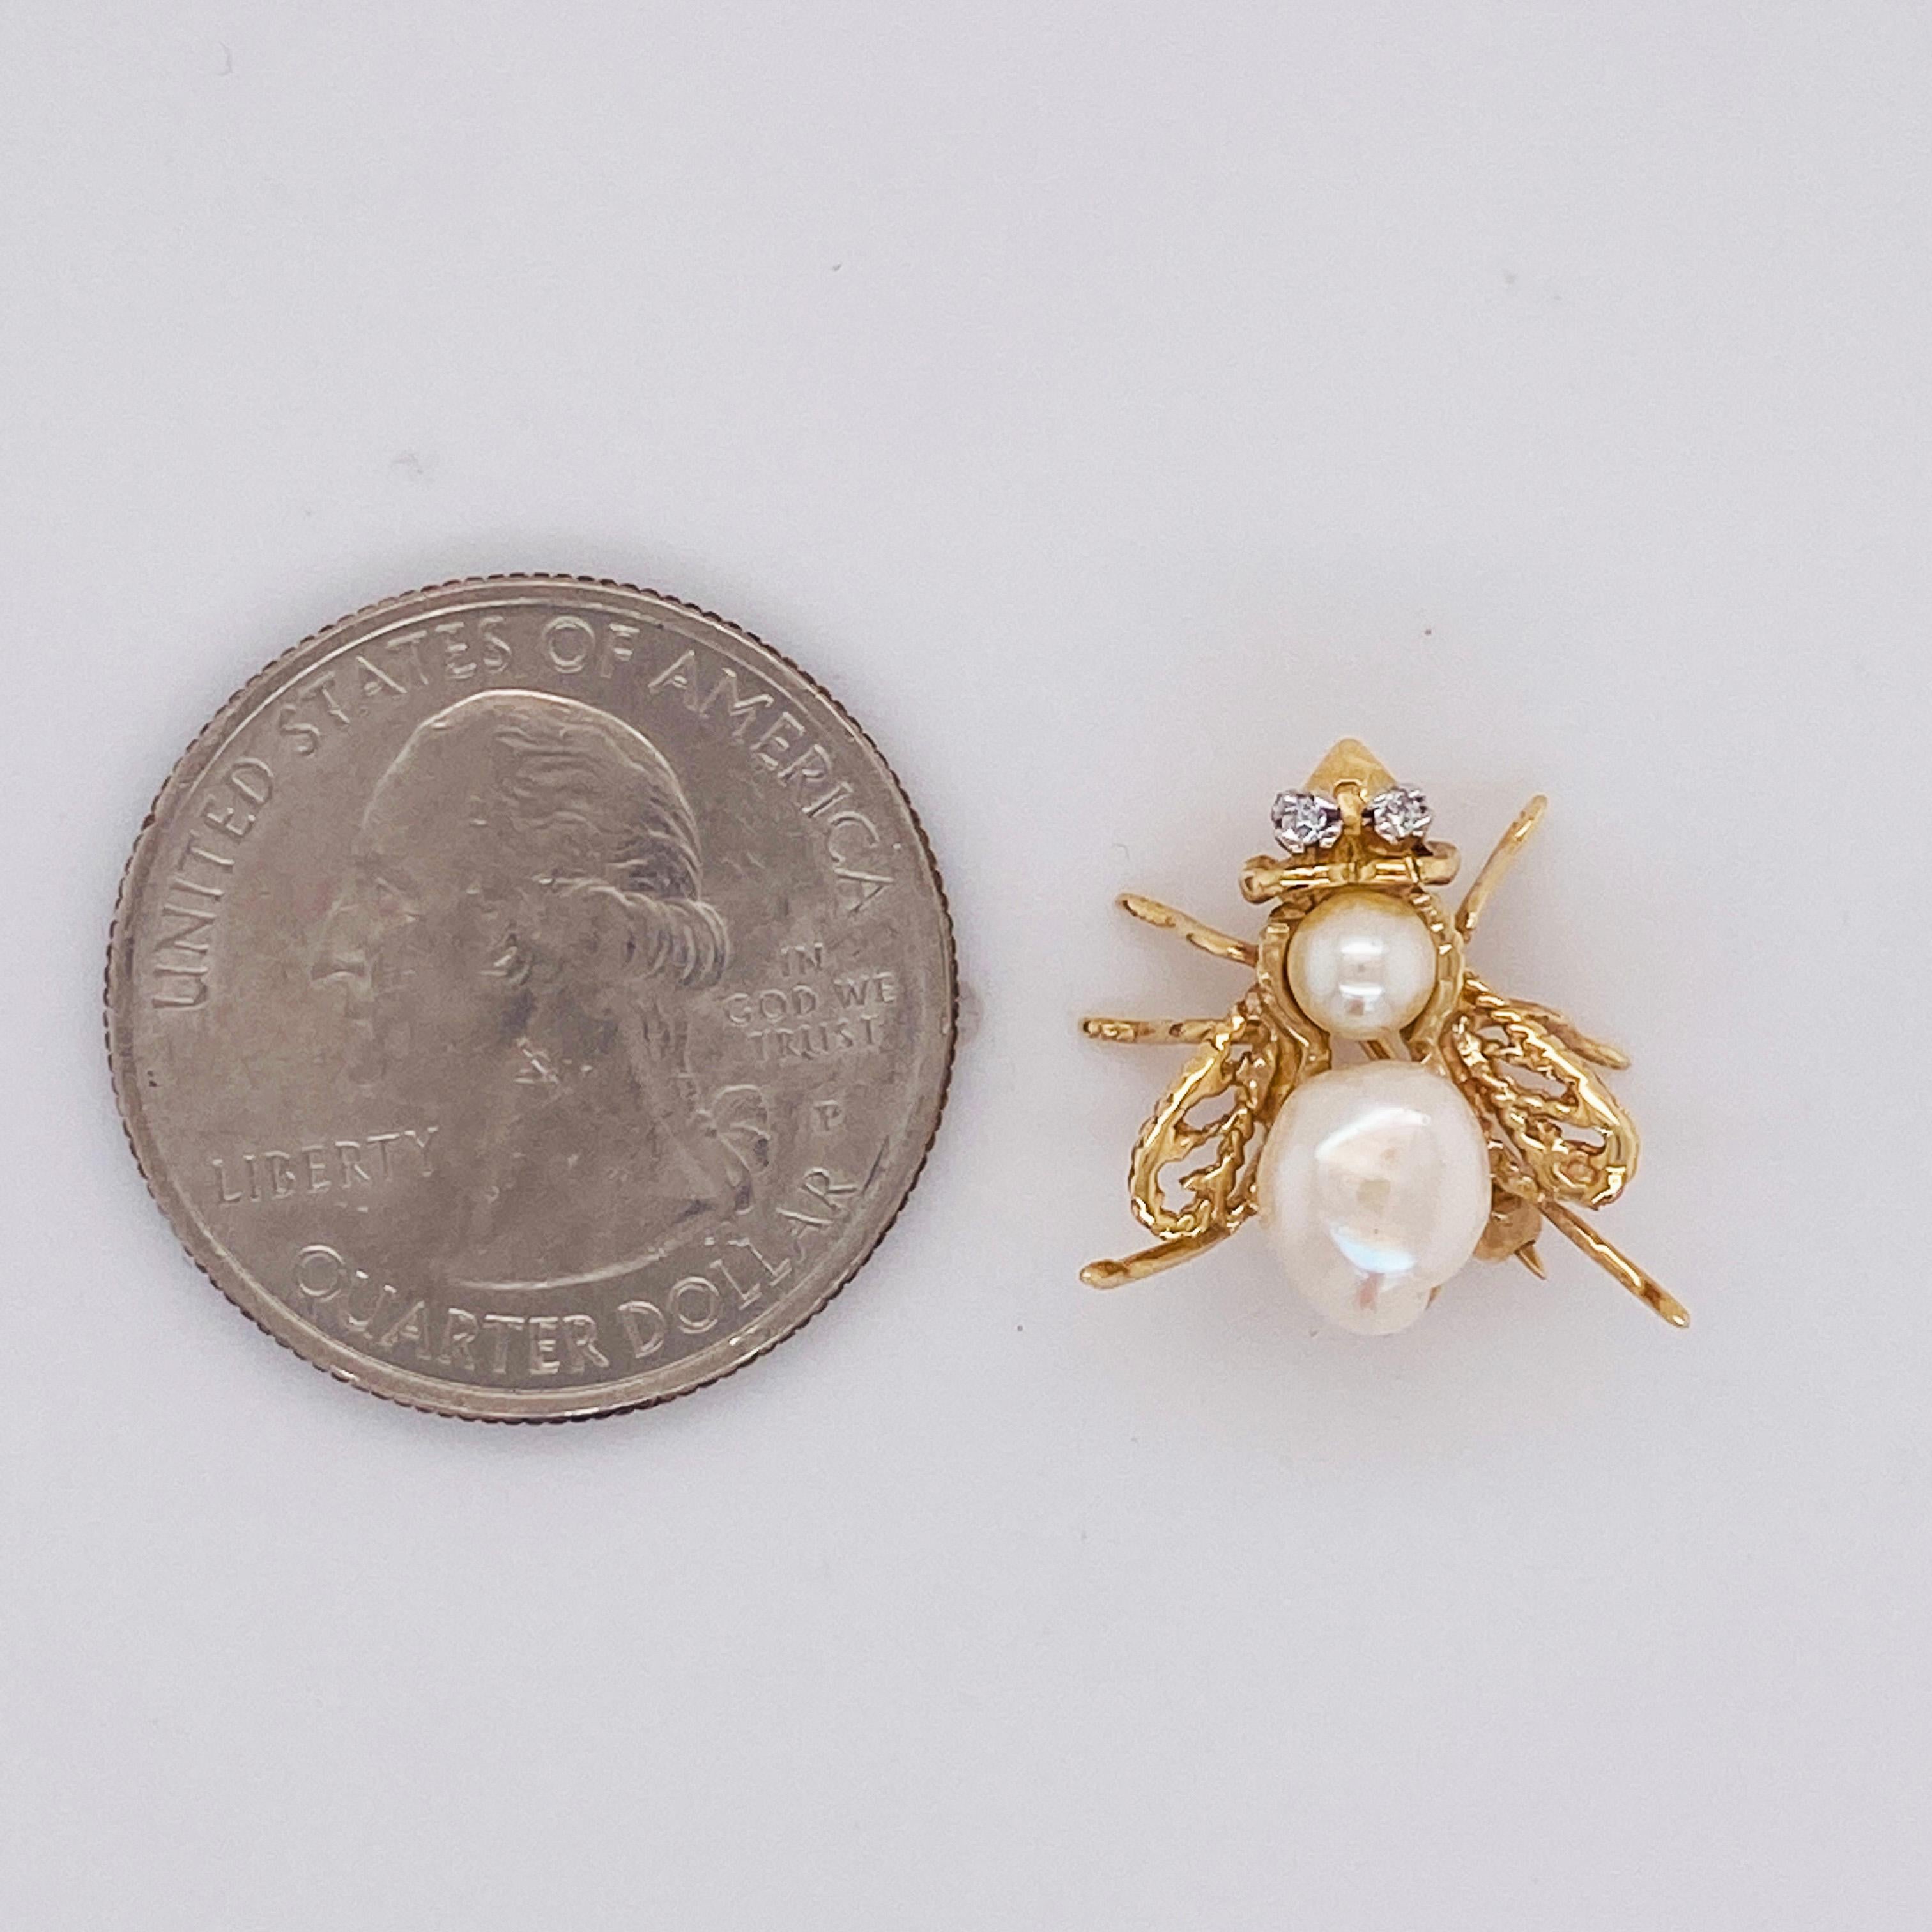 This novelty bee brooch has two genuine cultured pearls with diamonds in the eyes. It is created out of 14 karat yellow gold and was handmade. There is only one of these and it could adorn your collar or lapel with great style! The baroque shape of